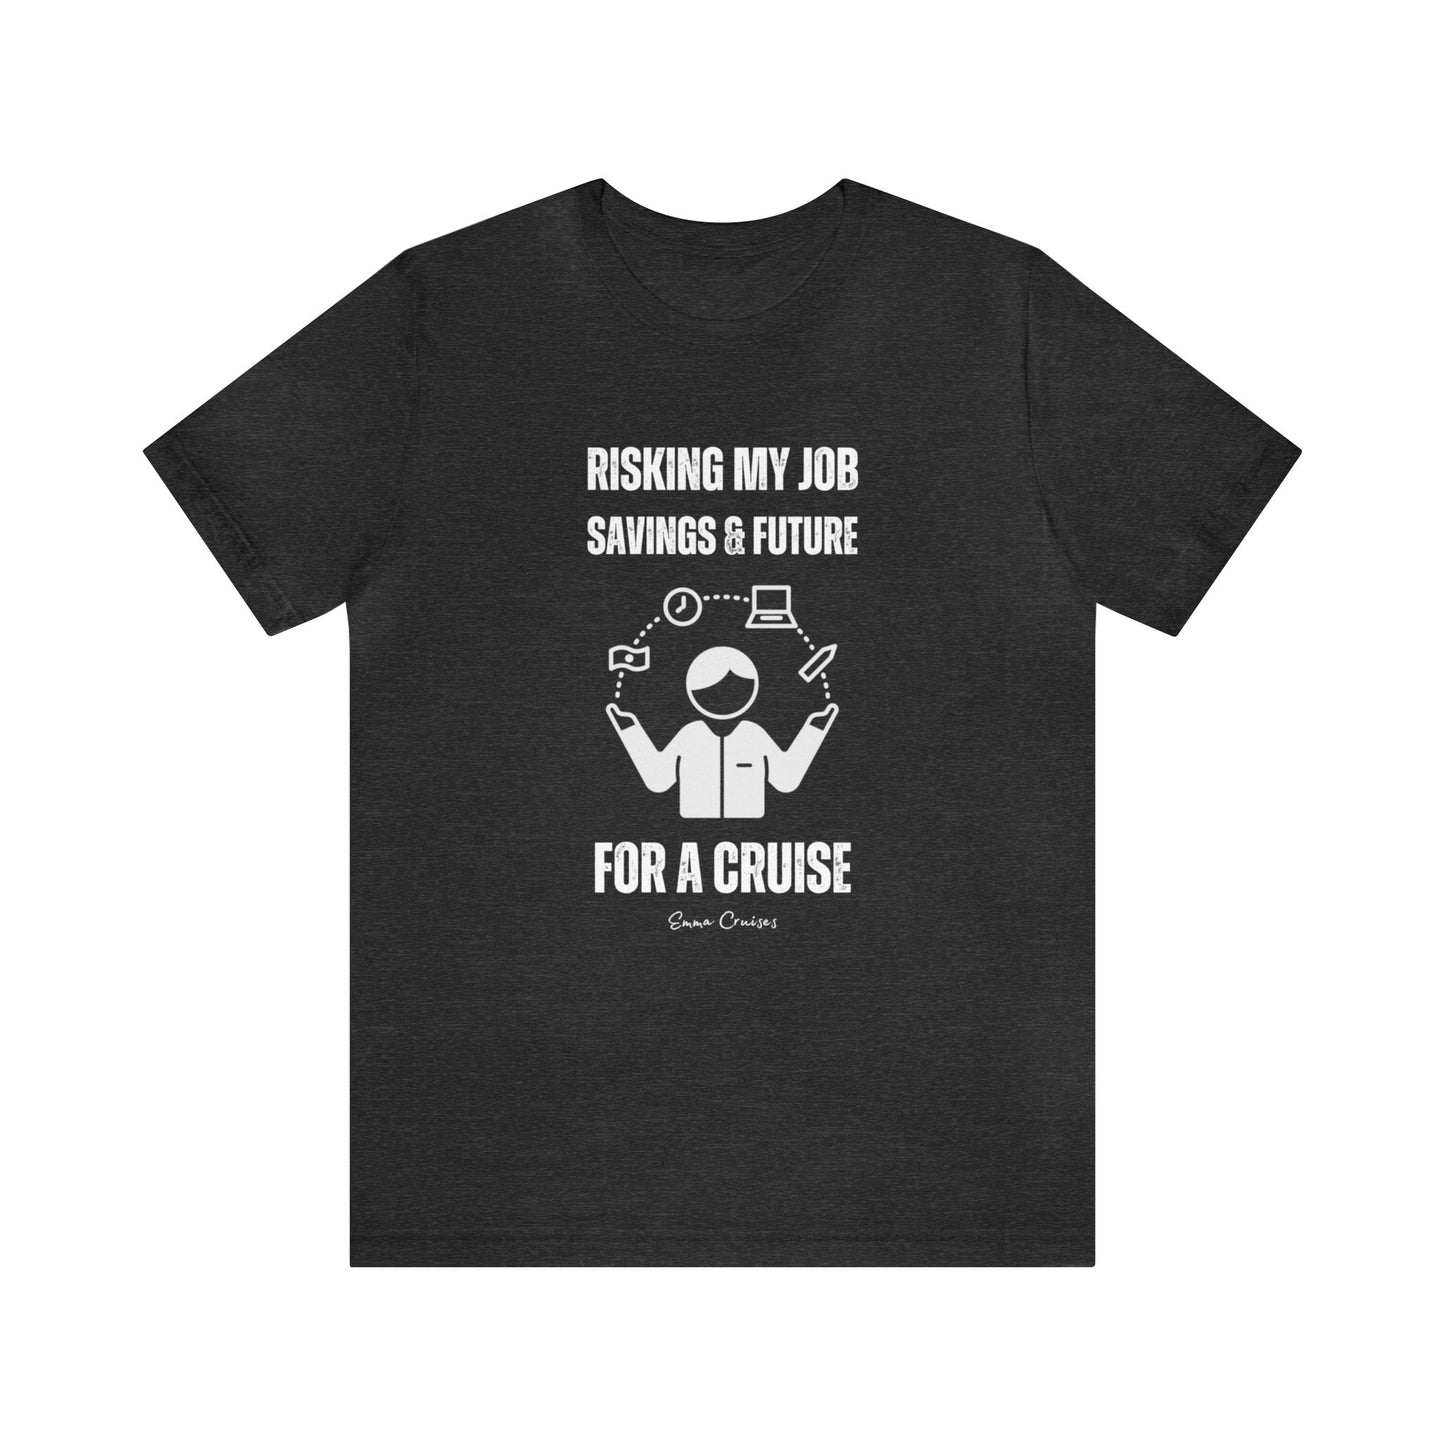 Risking Everything for a Cruise - UNISEX T-Shirt